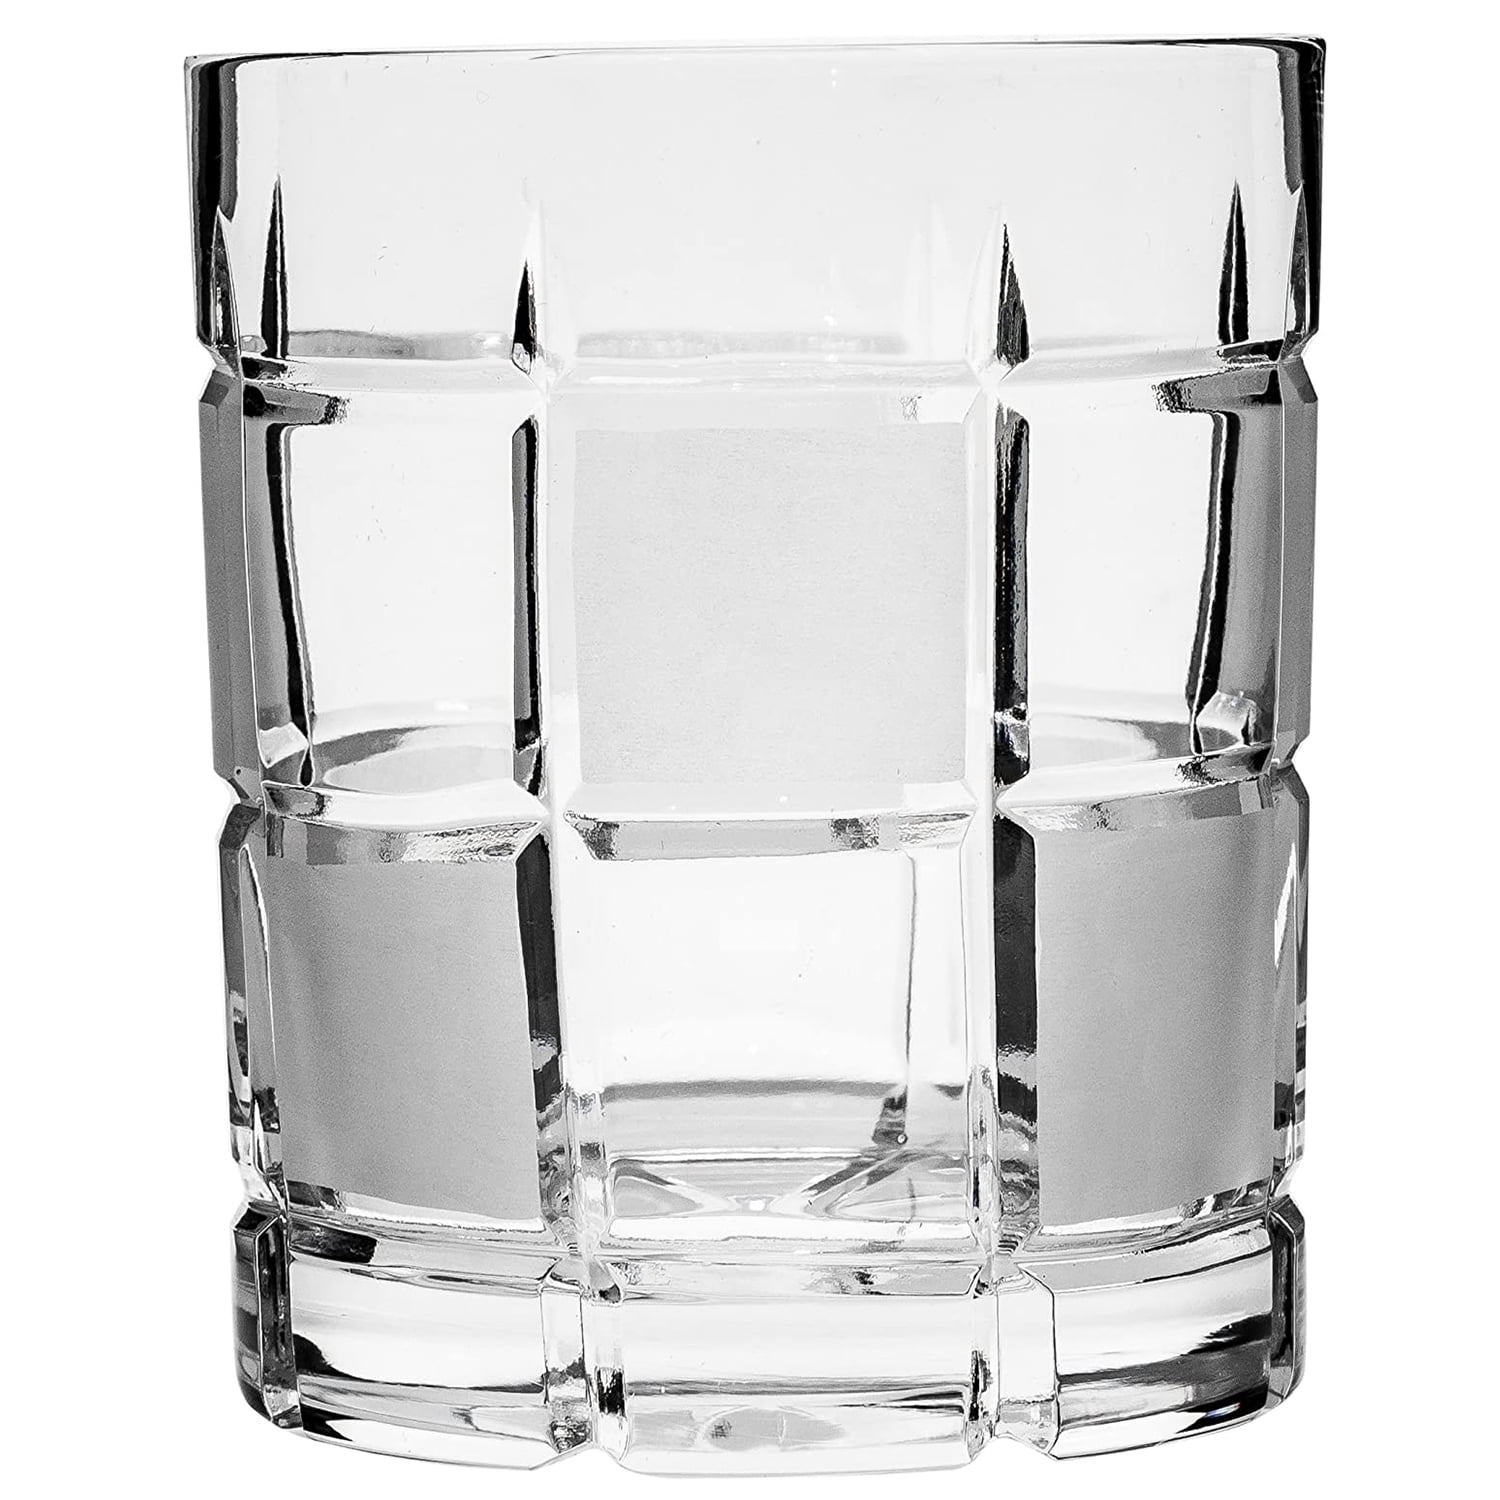 Double Wall Diamond Whisky Glass 6.8 Ounces, Set of 2 – Wine And Tableware